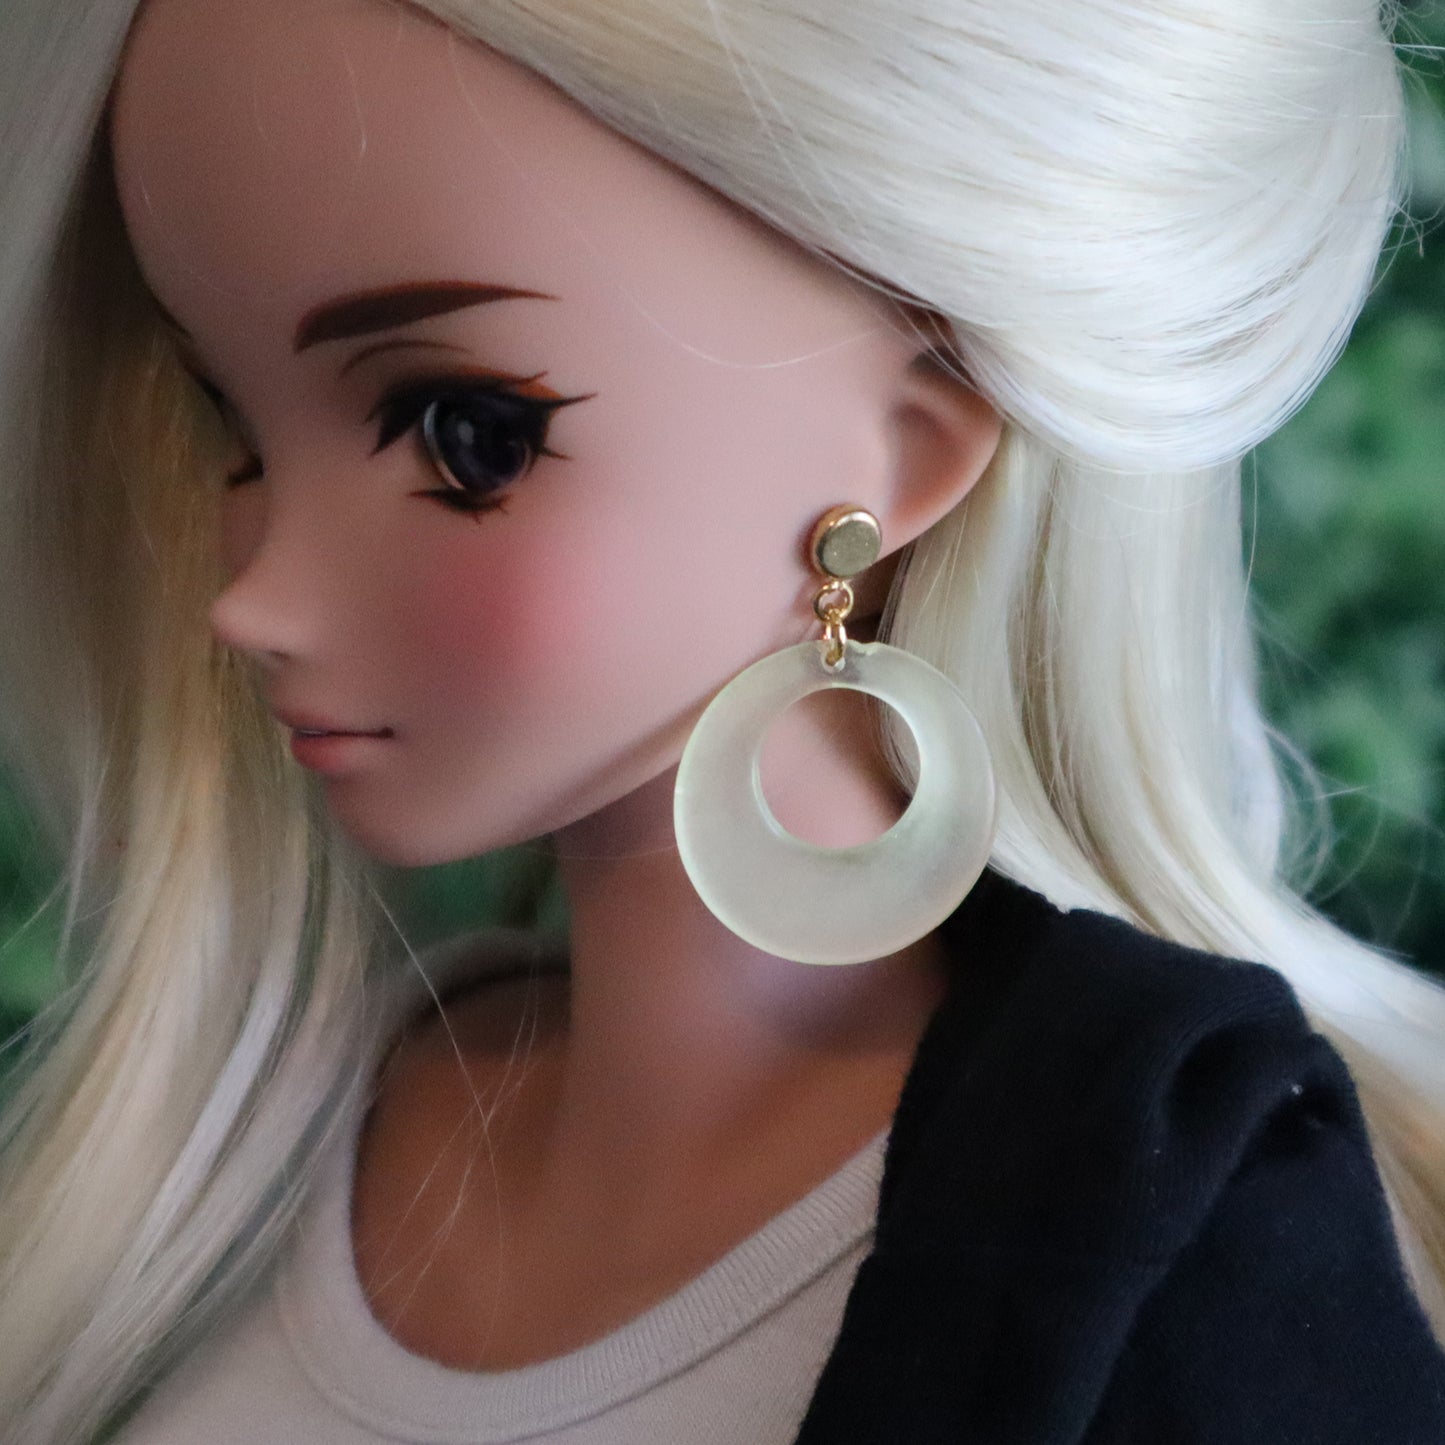 No-Hole Earrings for Vinyl Dolls - Vintage Yellow Hoops